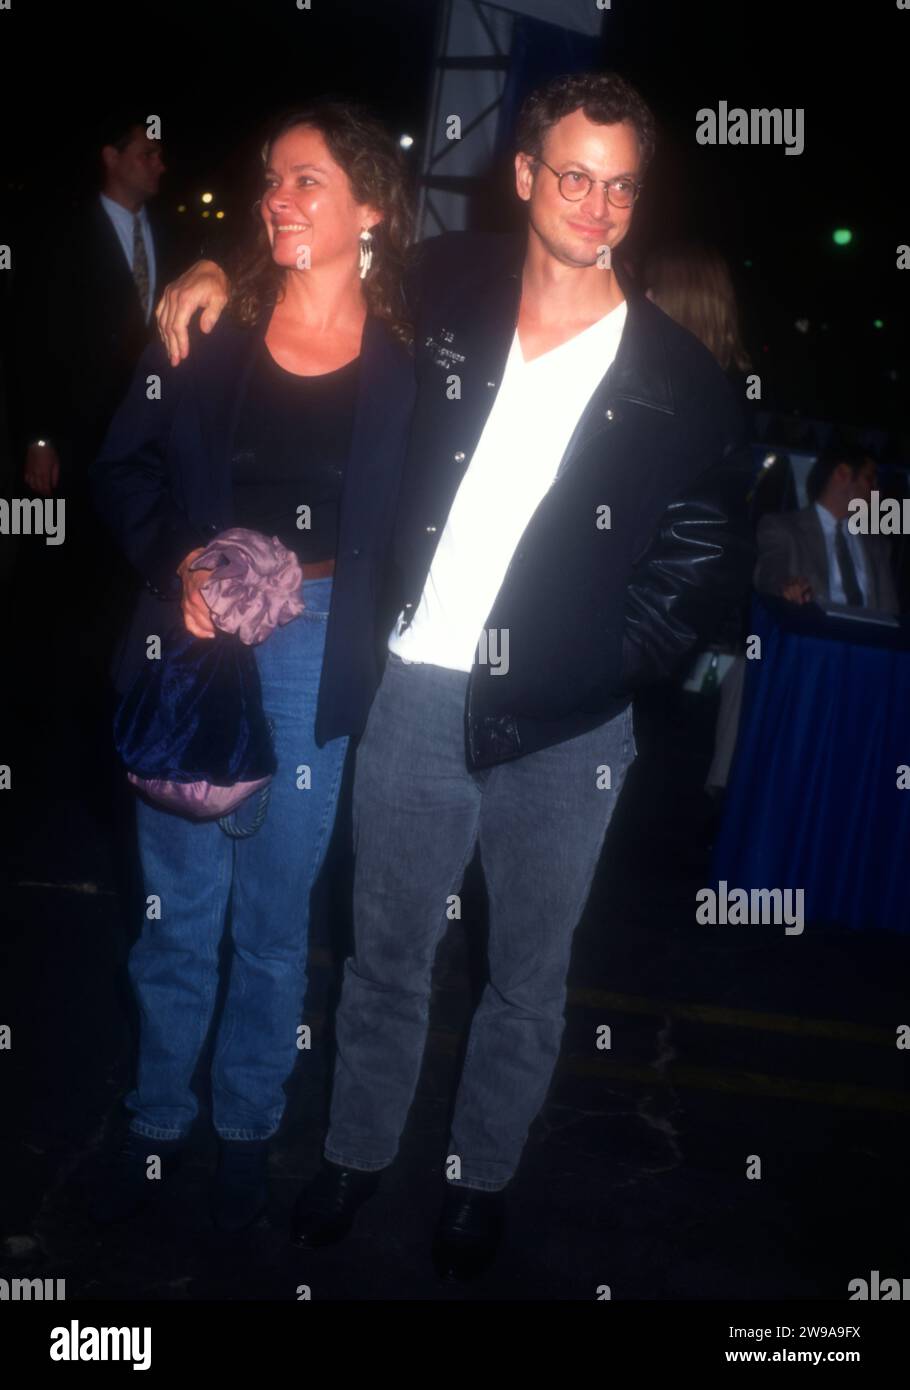 Century City, California, USA 30th September 1996 Actor Gary Sinise and wife Moira Harris attend 20th Century StudioÕs ÔThat Thing You DoÕ Premiere at Century City Cineplex Odeon Theaters on September 30, 1996 in Century City, California, USA. Photo by Barry King/Alamy Stock Photo Stock Photo